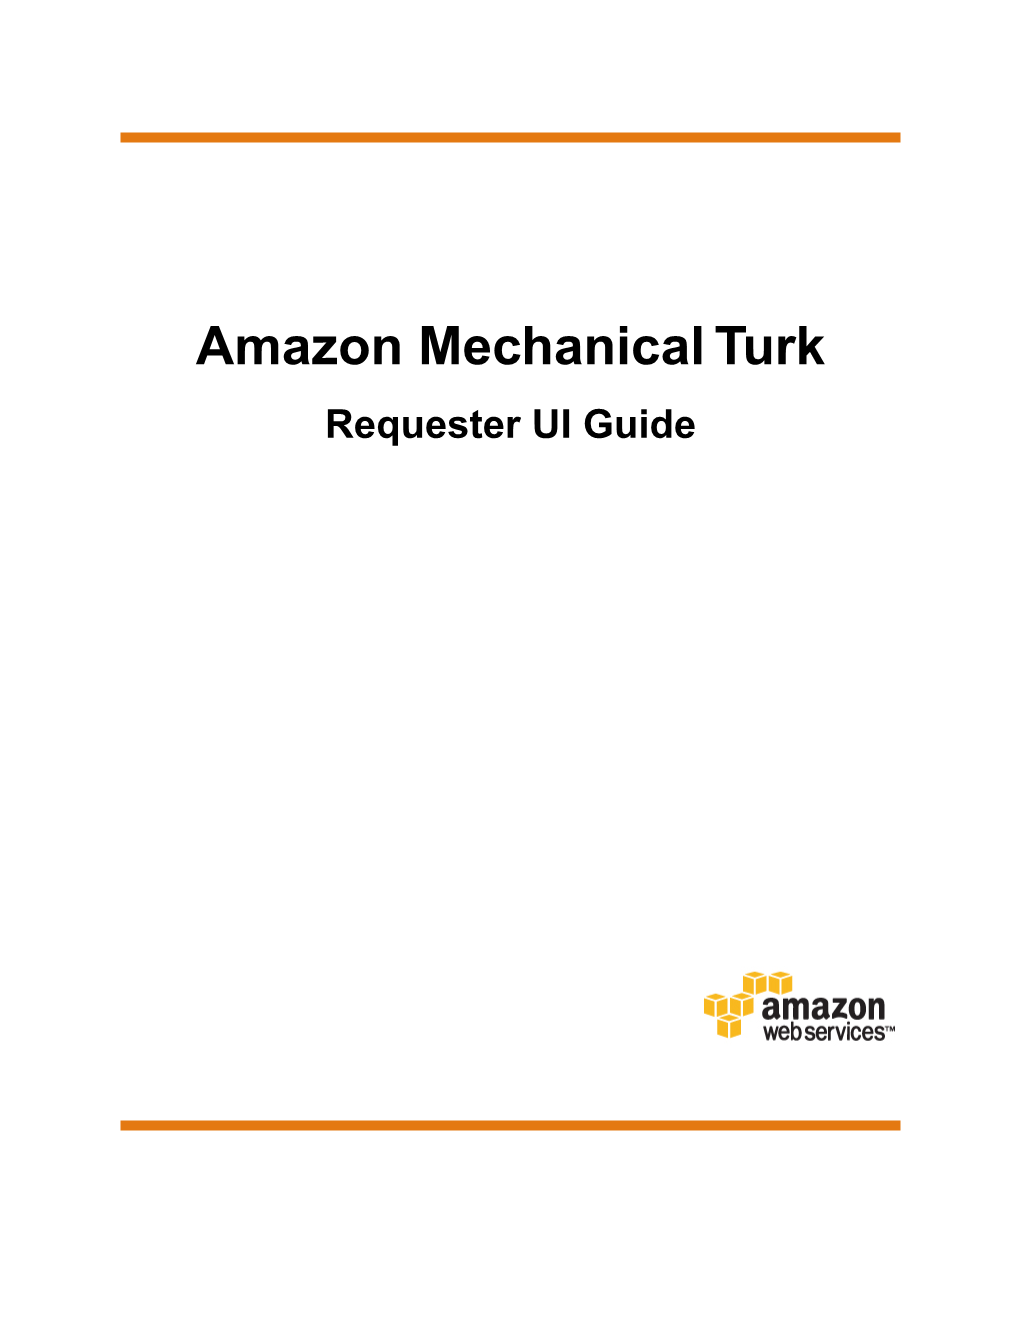 Amazon Mechanical Turk Requester UI Guide Amazon Mechanical Turk Requester UI Guide